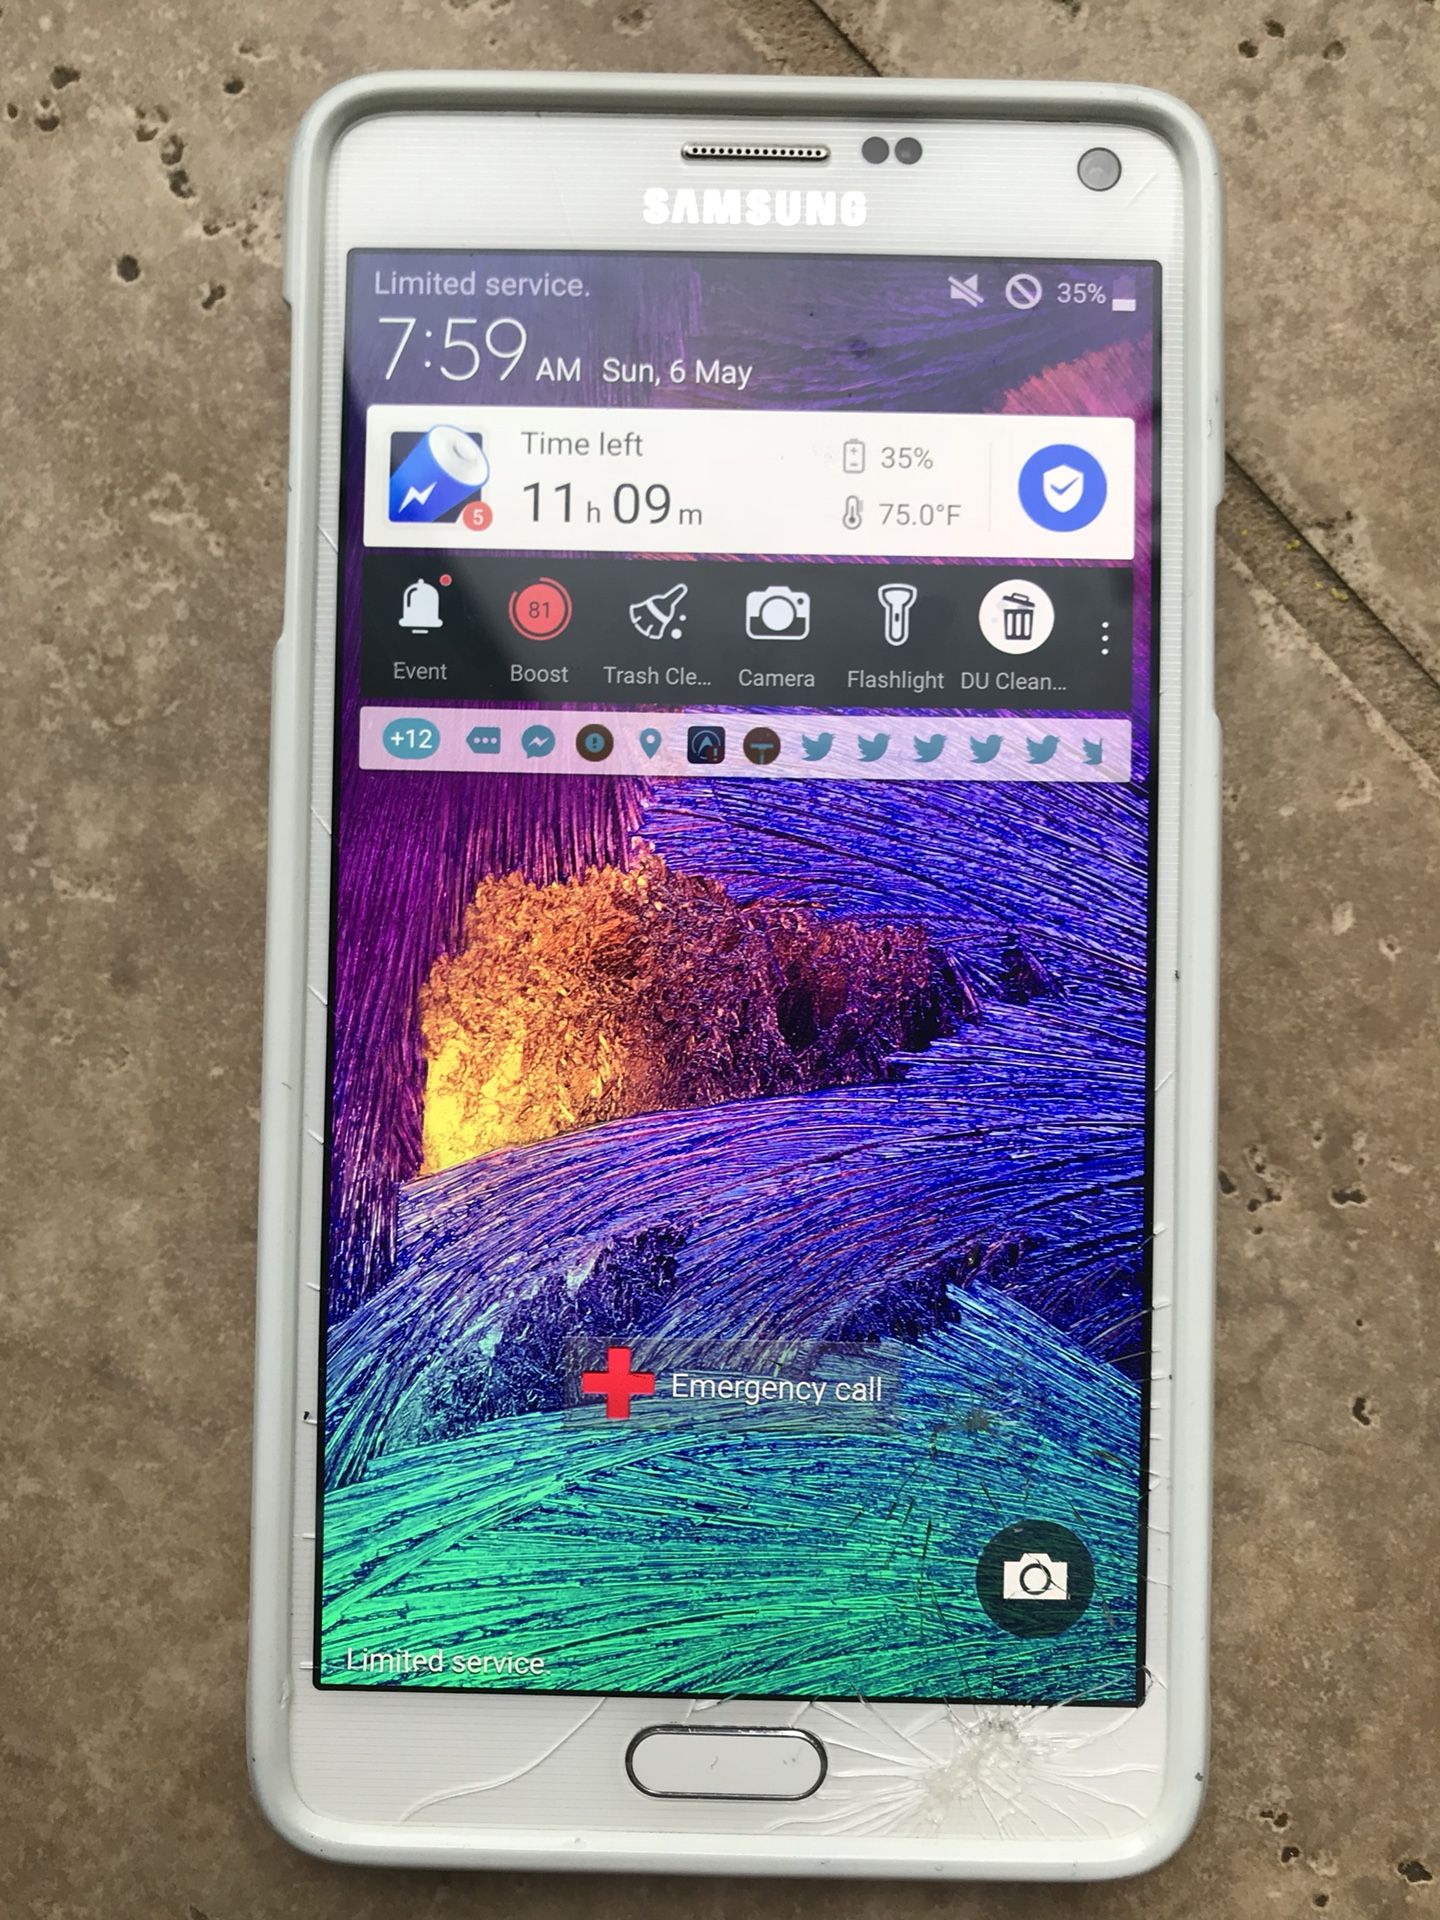 Samsung Note 4 cell phone $55